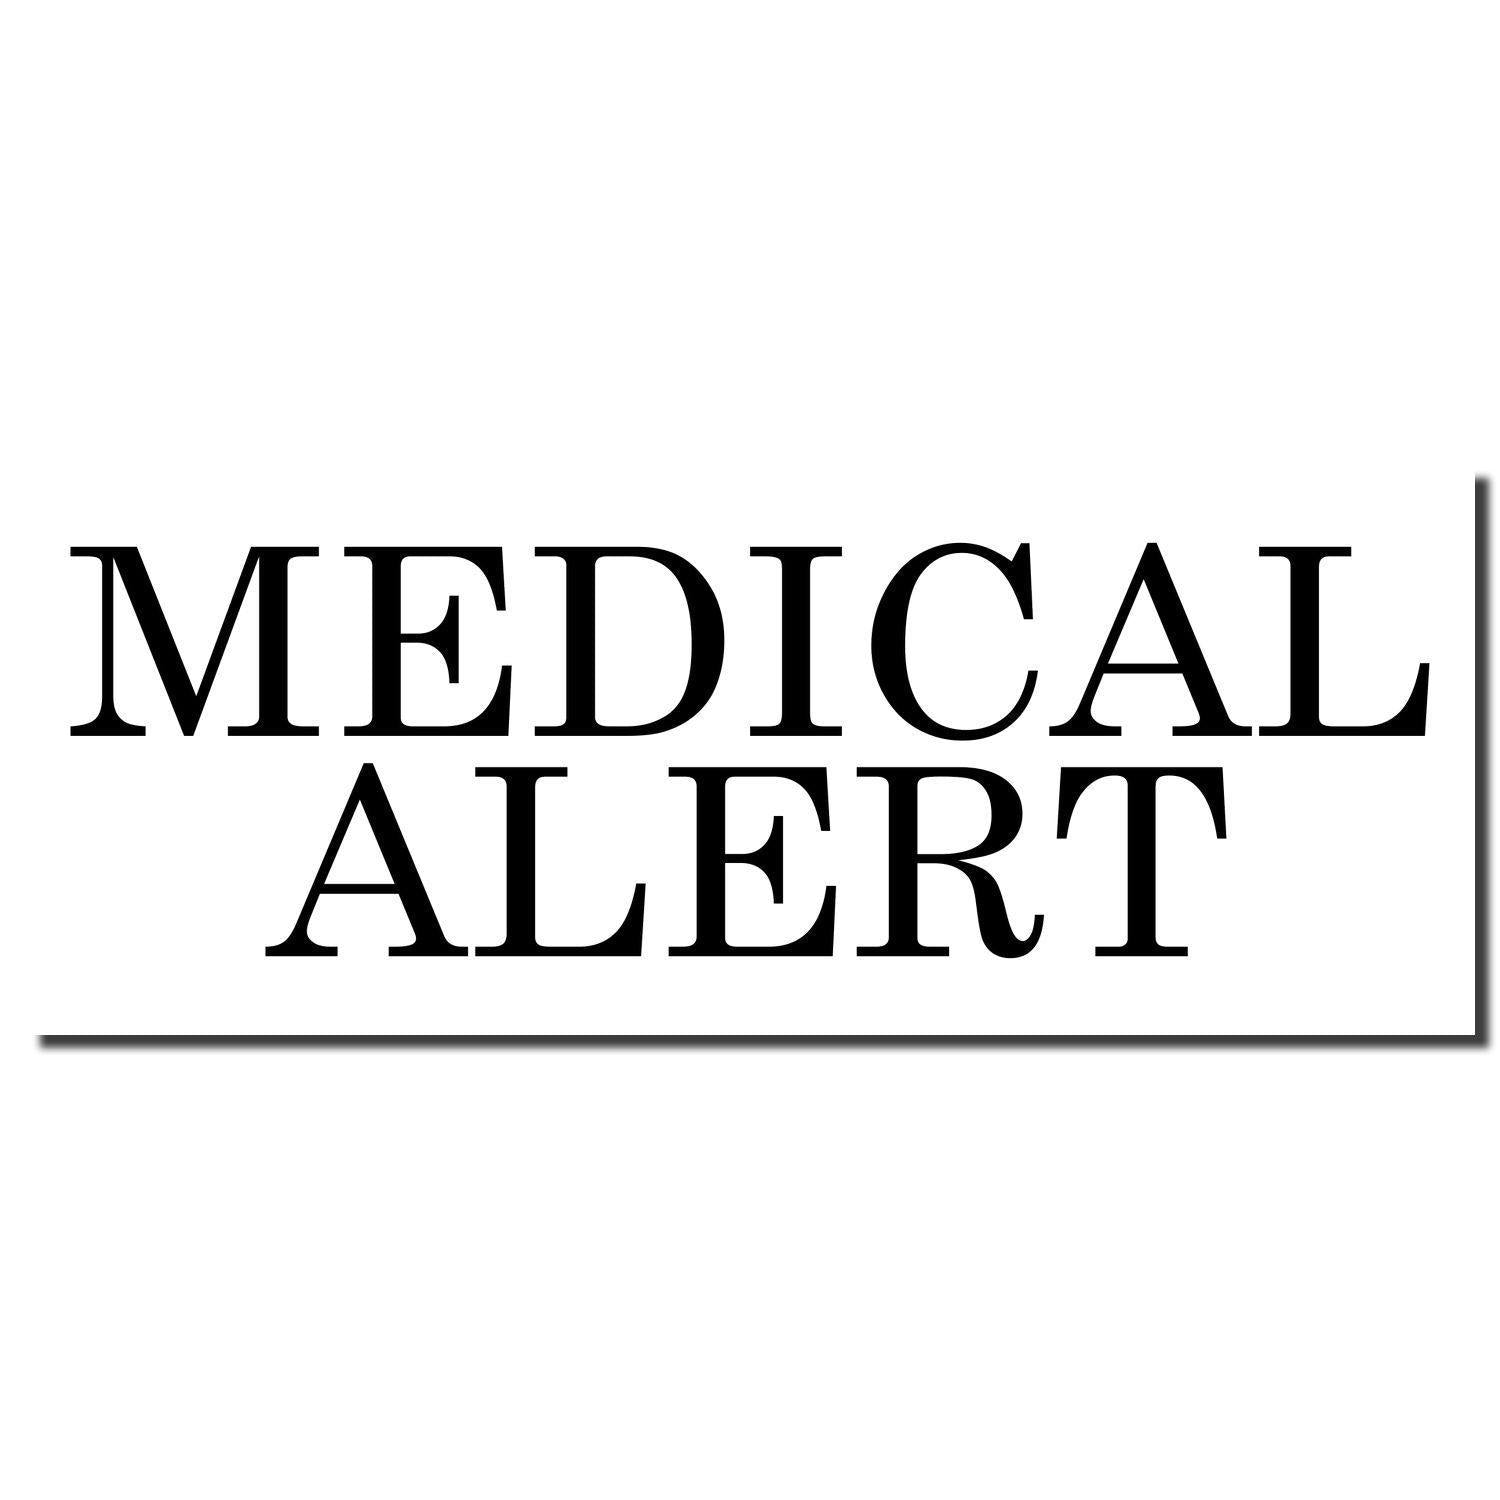 Medical Alert Rubber Stamp - Engineer Seal Stamps - Brand_Acorn, Impression Size_Small, Stamp Type_Regular Stamp, Type of Use_Medical Office